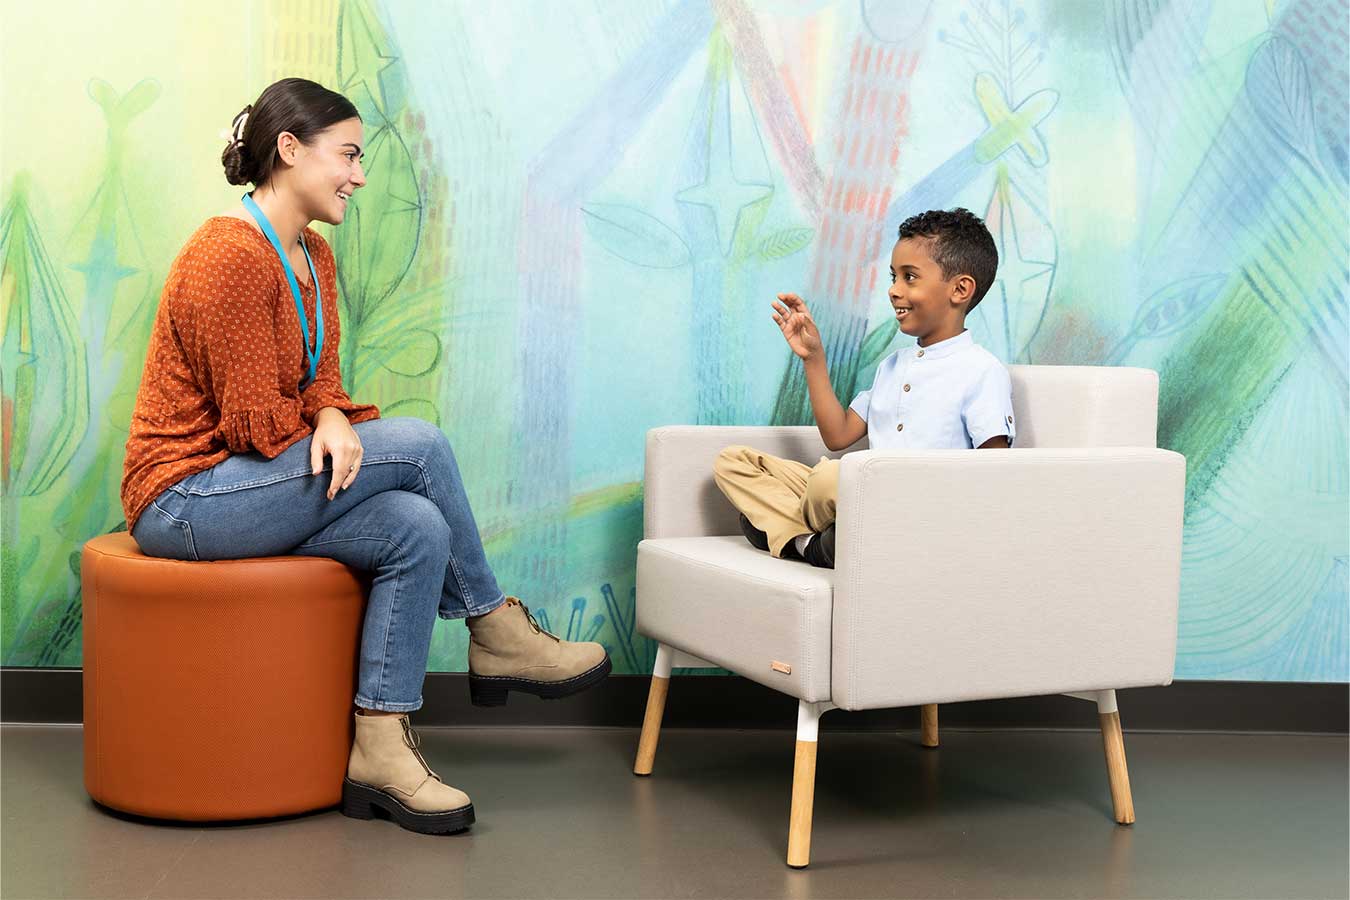 Provider in orange sweater talks with young boy seated in a chair